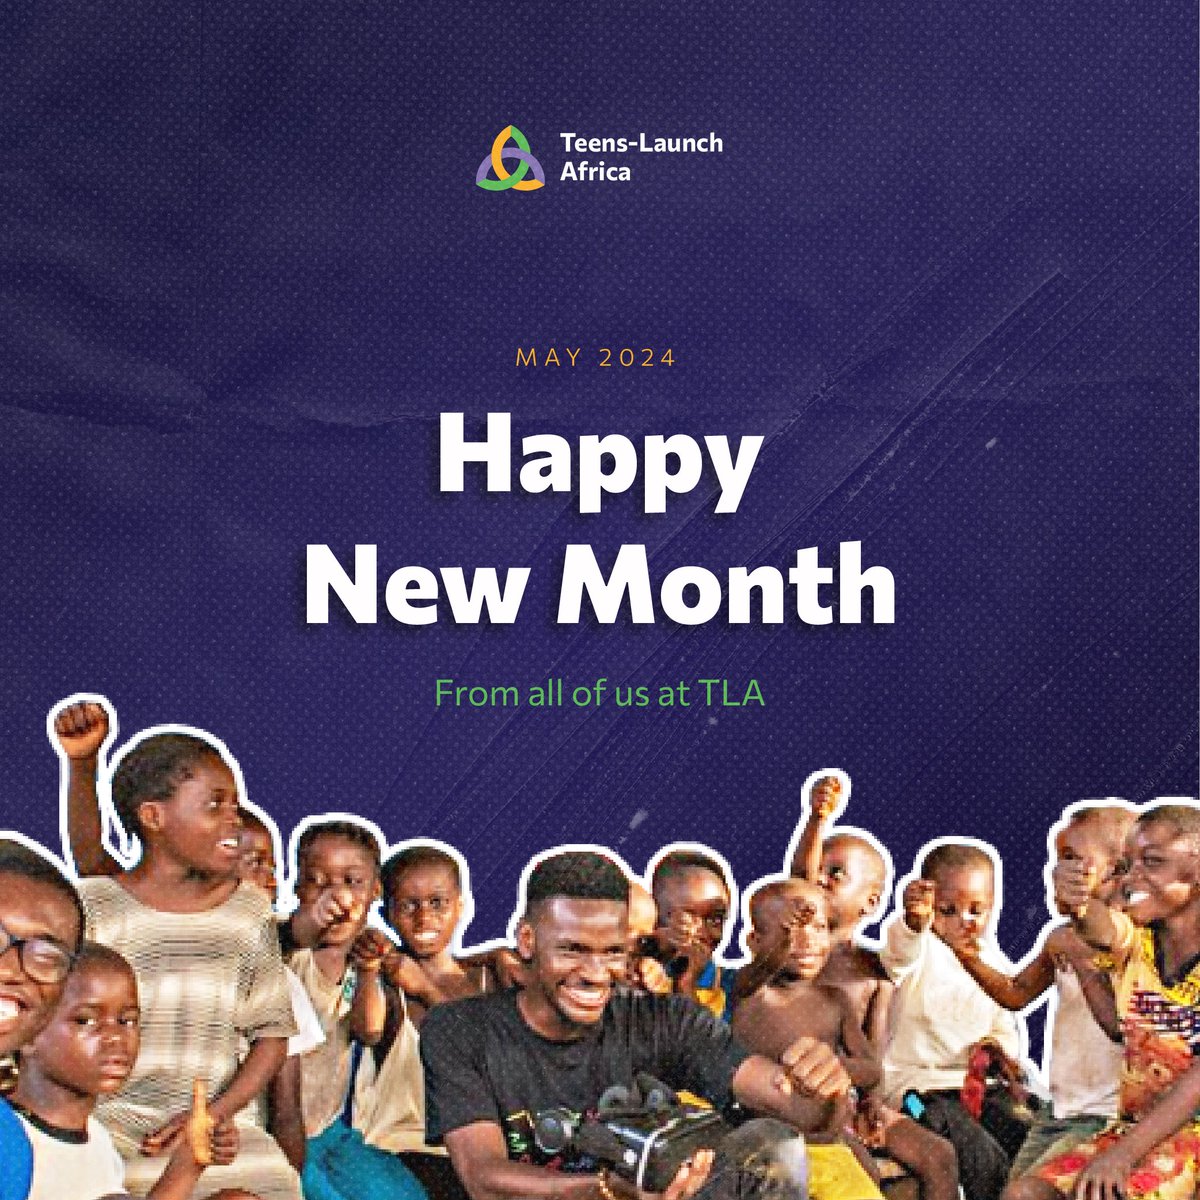 Happy New Month! As we enter the month of May, We at @Teens_Launch wish you a wonderful, productive, and joyful month ahead.

May this month bring you closer to achieving your goals, nurturing your passions, and making meaningful progress in your endeavors. 

#digitallife #SDG4